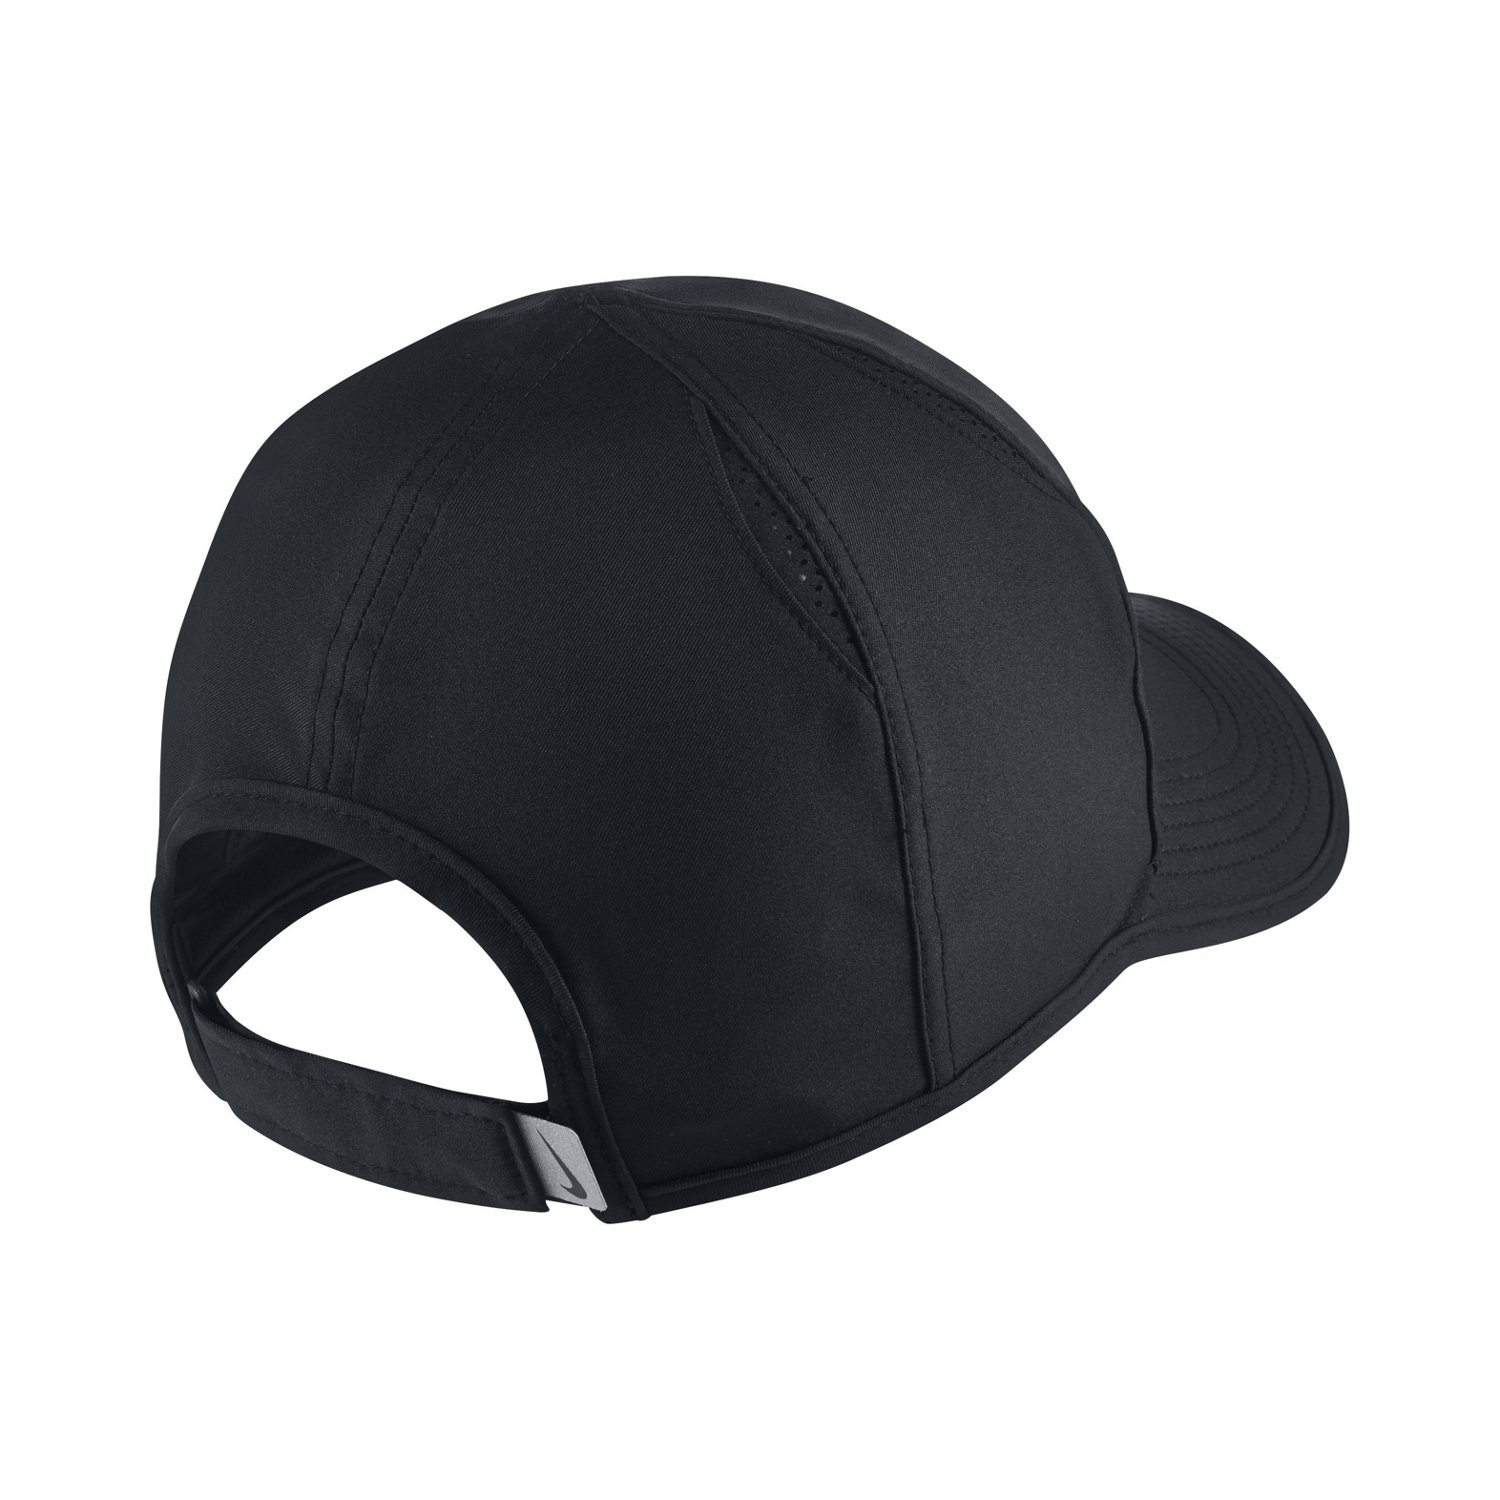 hire Beaten truck the first Nike Adults' Featherlight Cap | Academy